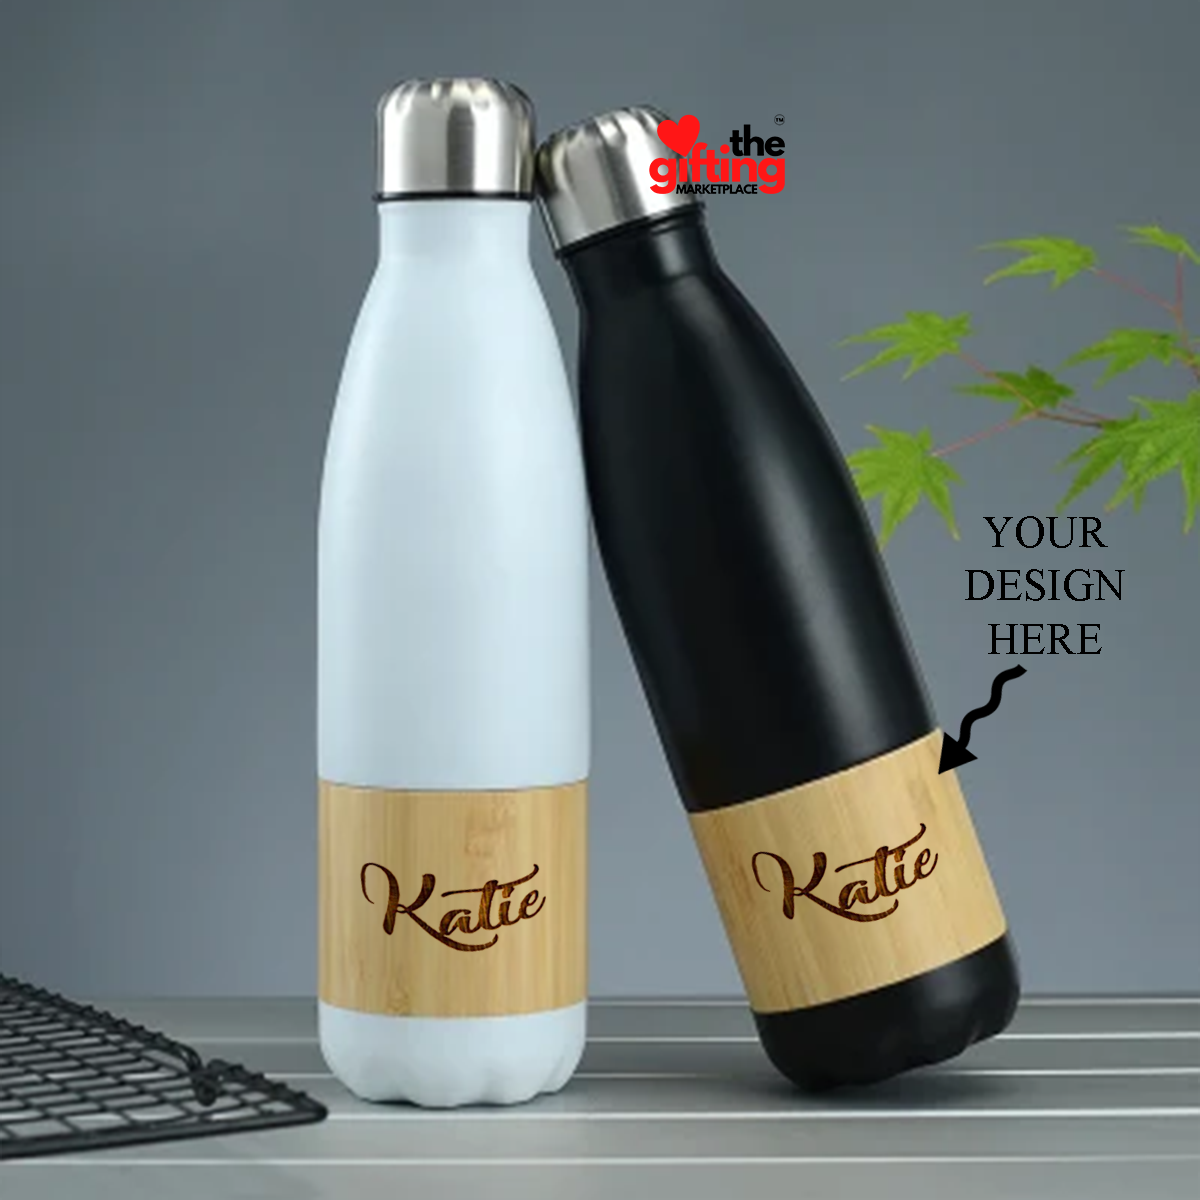 Personalized Engraved Insulated Double Wall Bamboo Cola Shape Water Bottle White - 500ml - For Return Gift, Corporate Gifting, Office or Personal Use BGH199